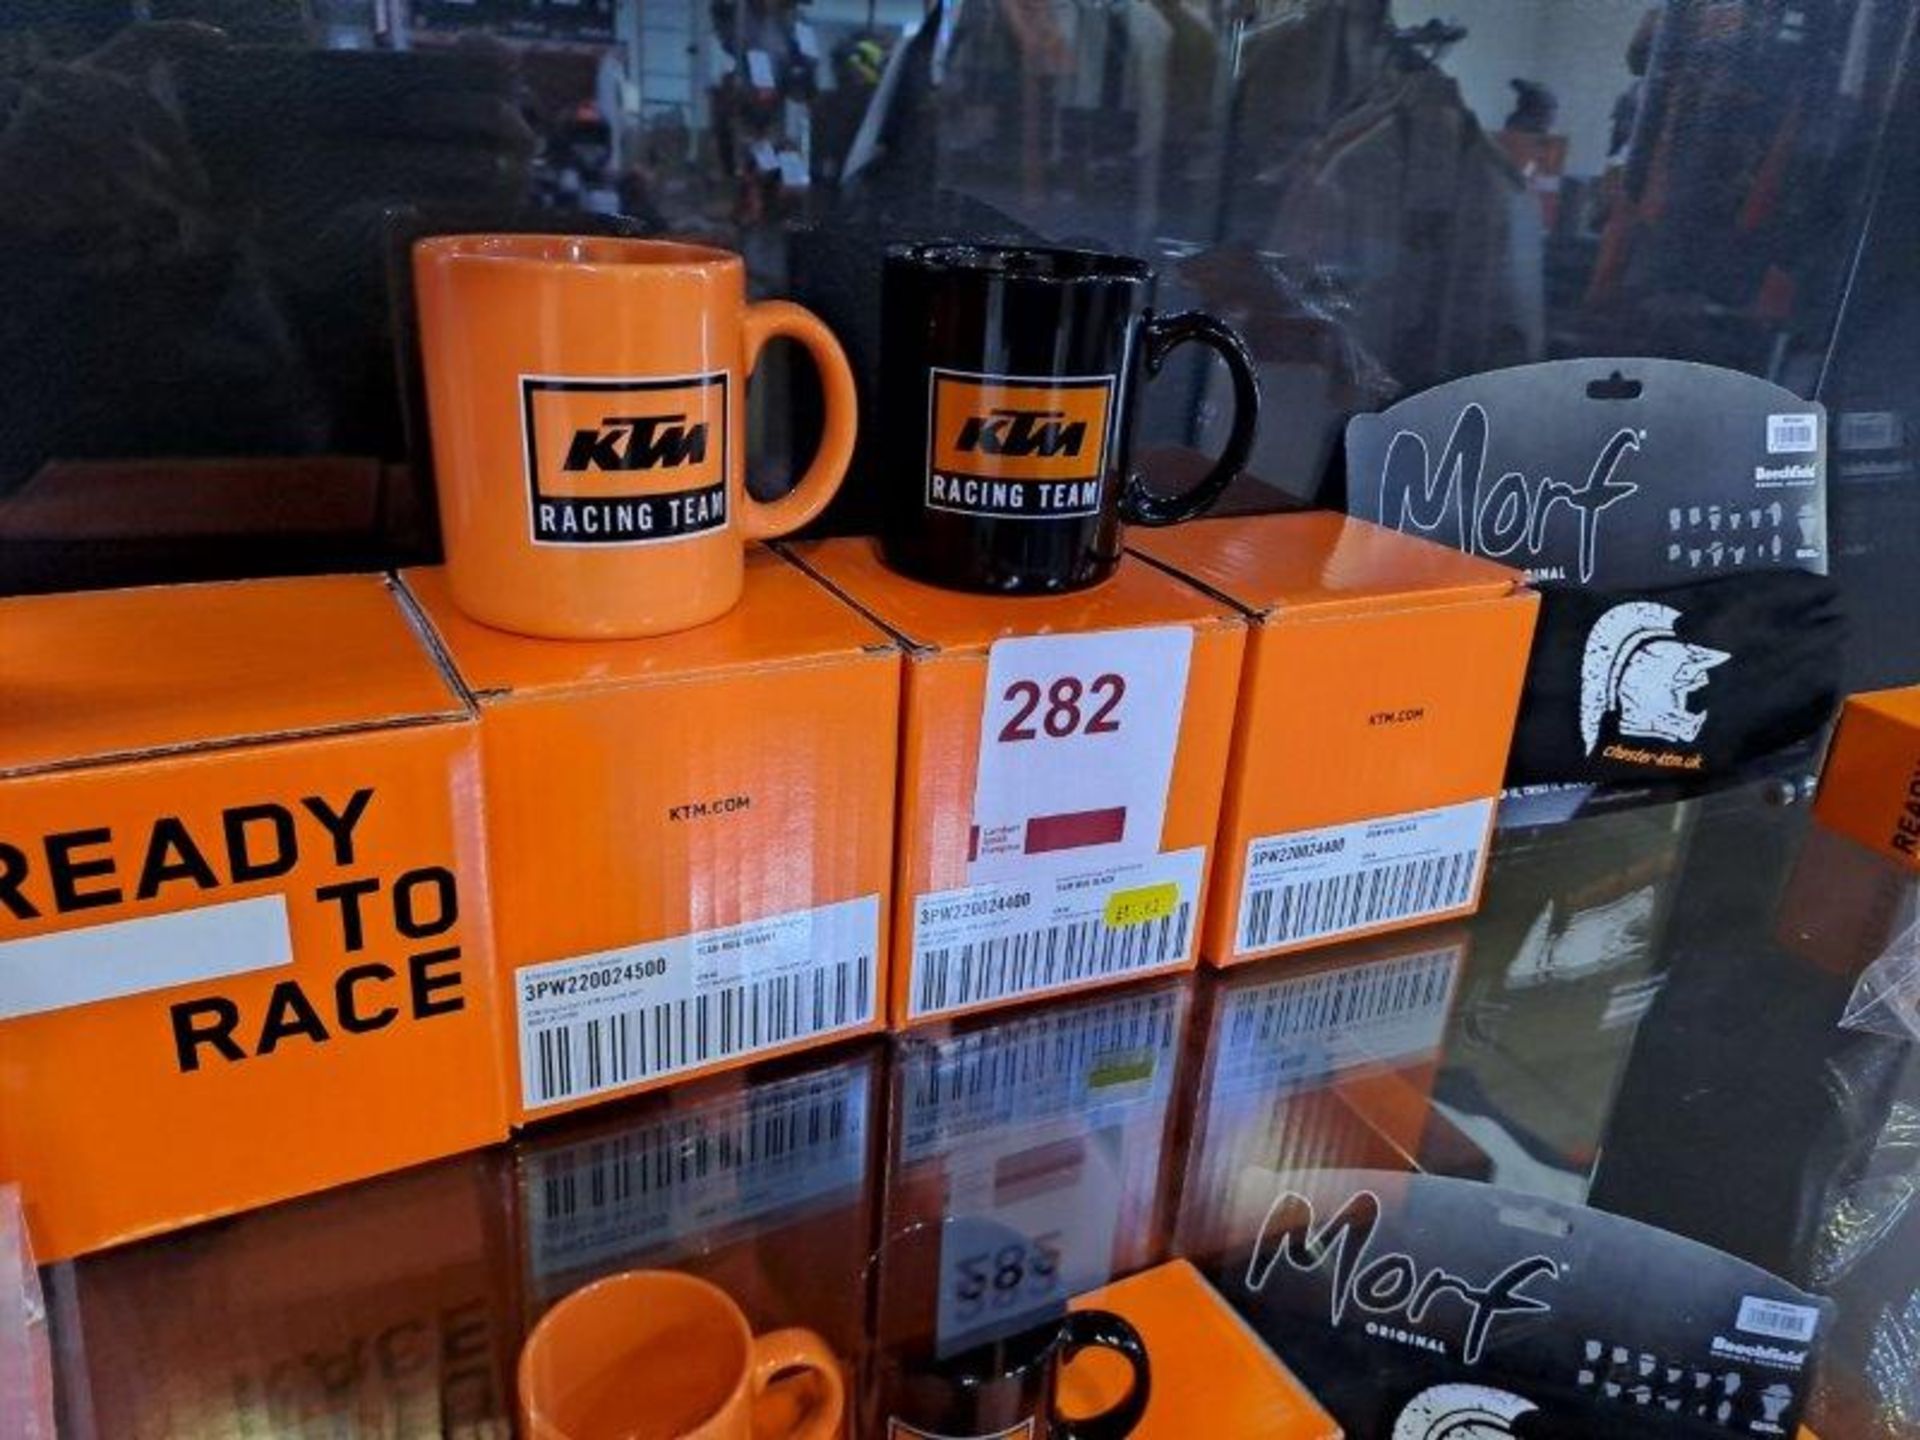 Contents of shelf of KTM Merchandise as pictured - Image 3 of 7